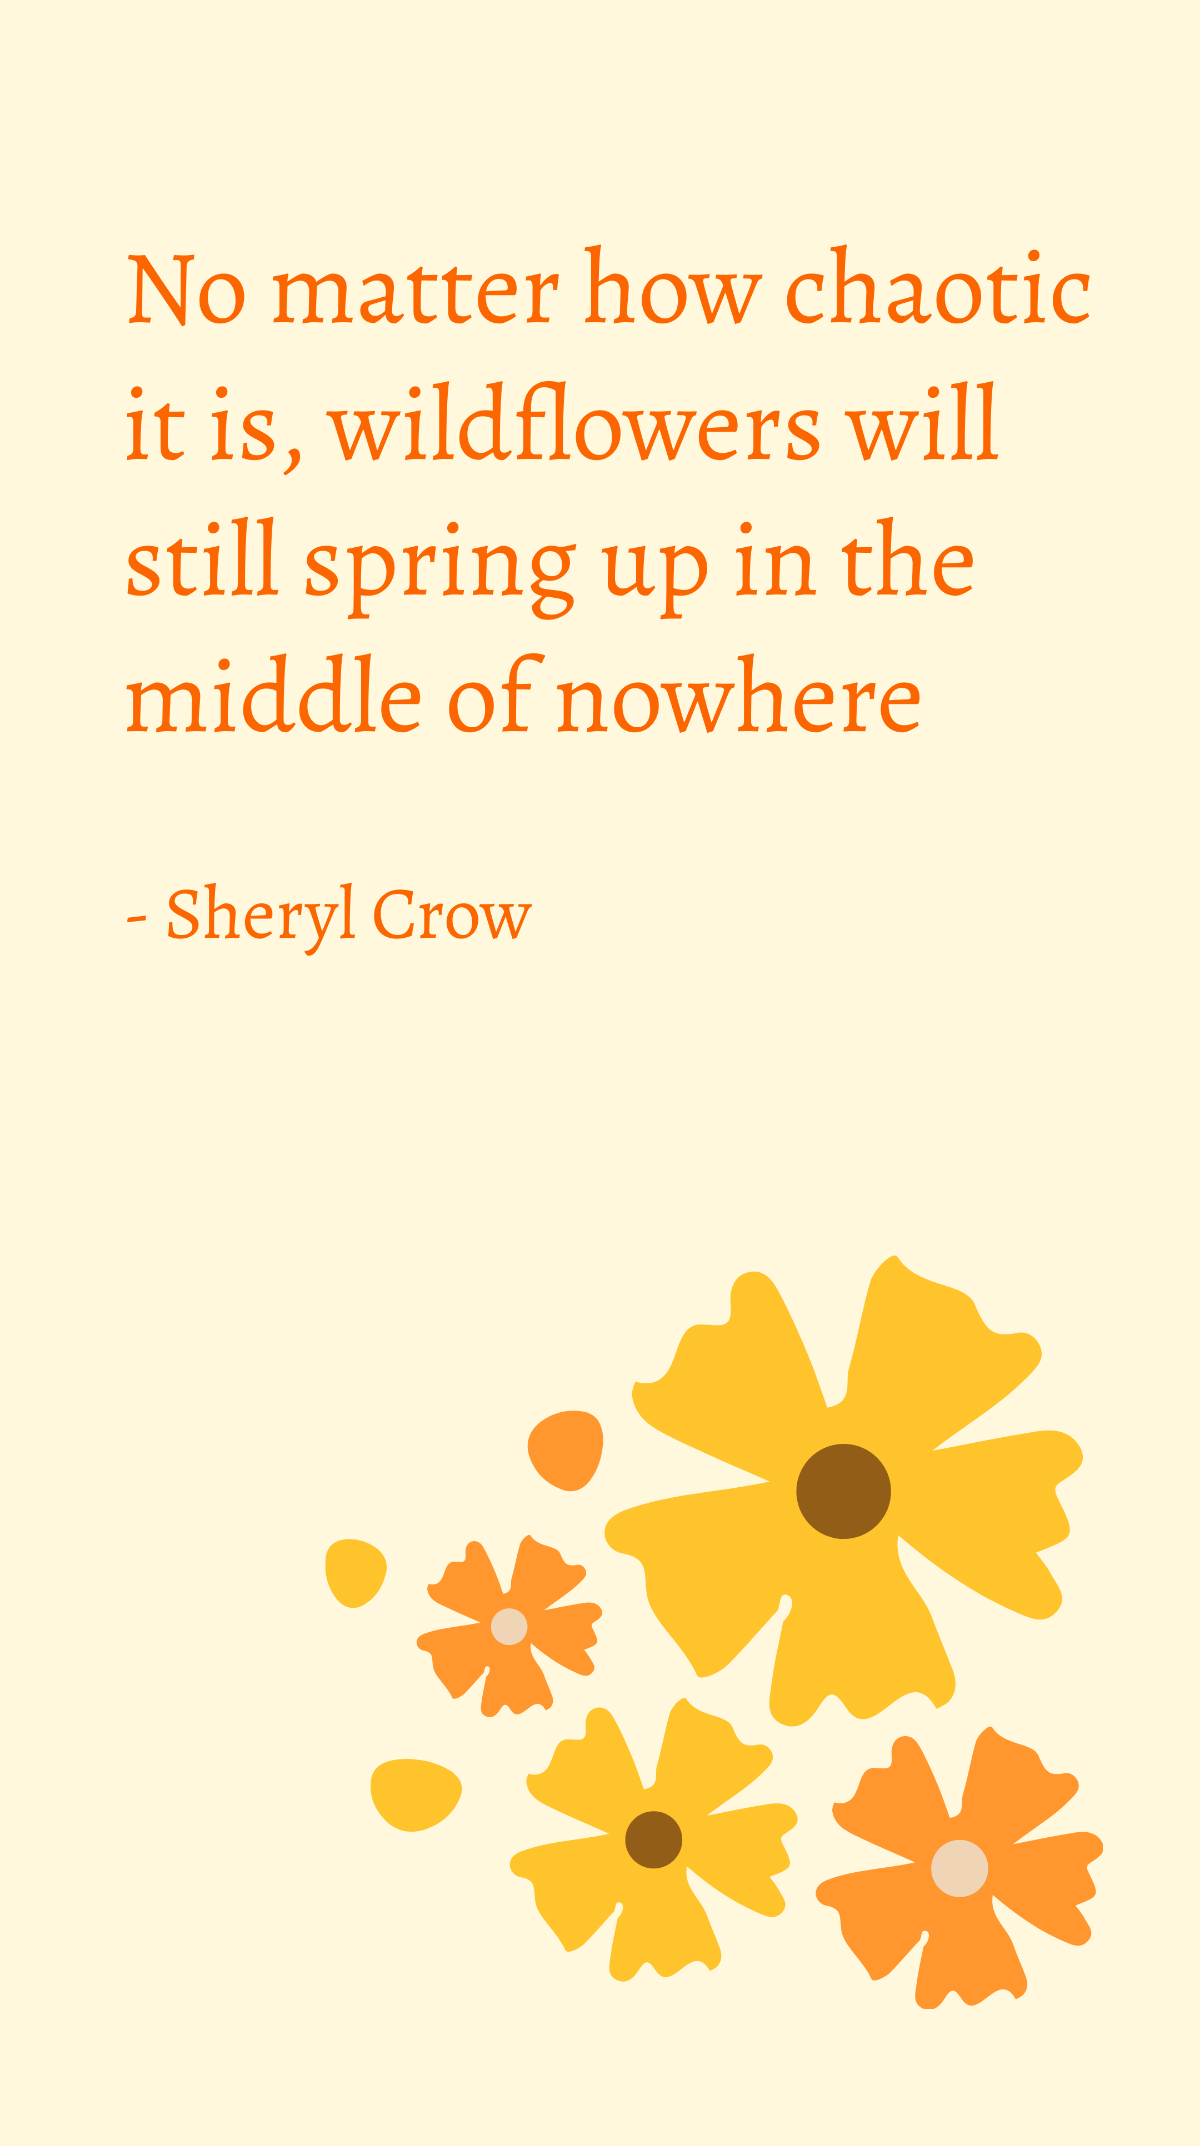 Sheryl Crow - No matter how chaotic it is, wildflowers will still spring up in the middle of nowhere